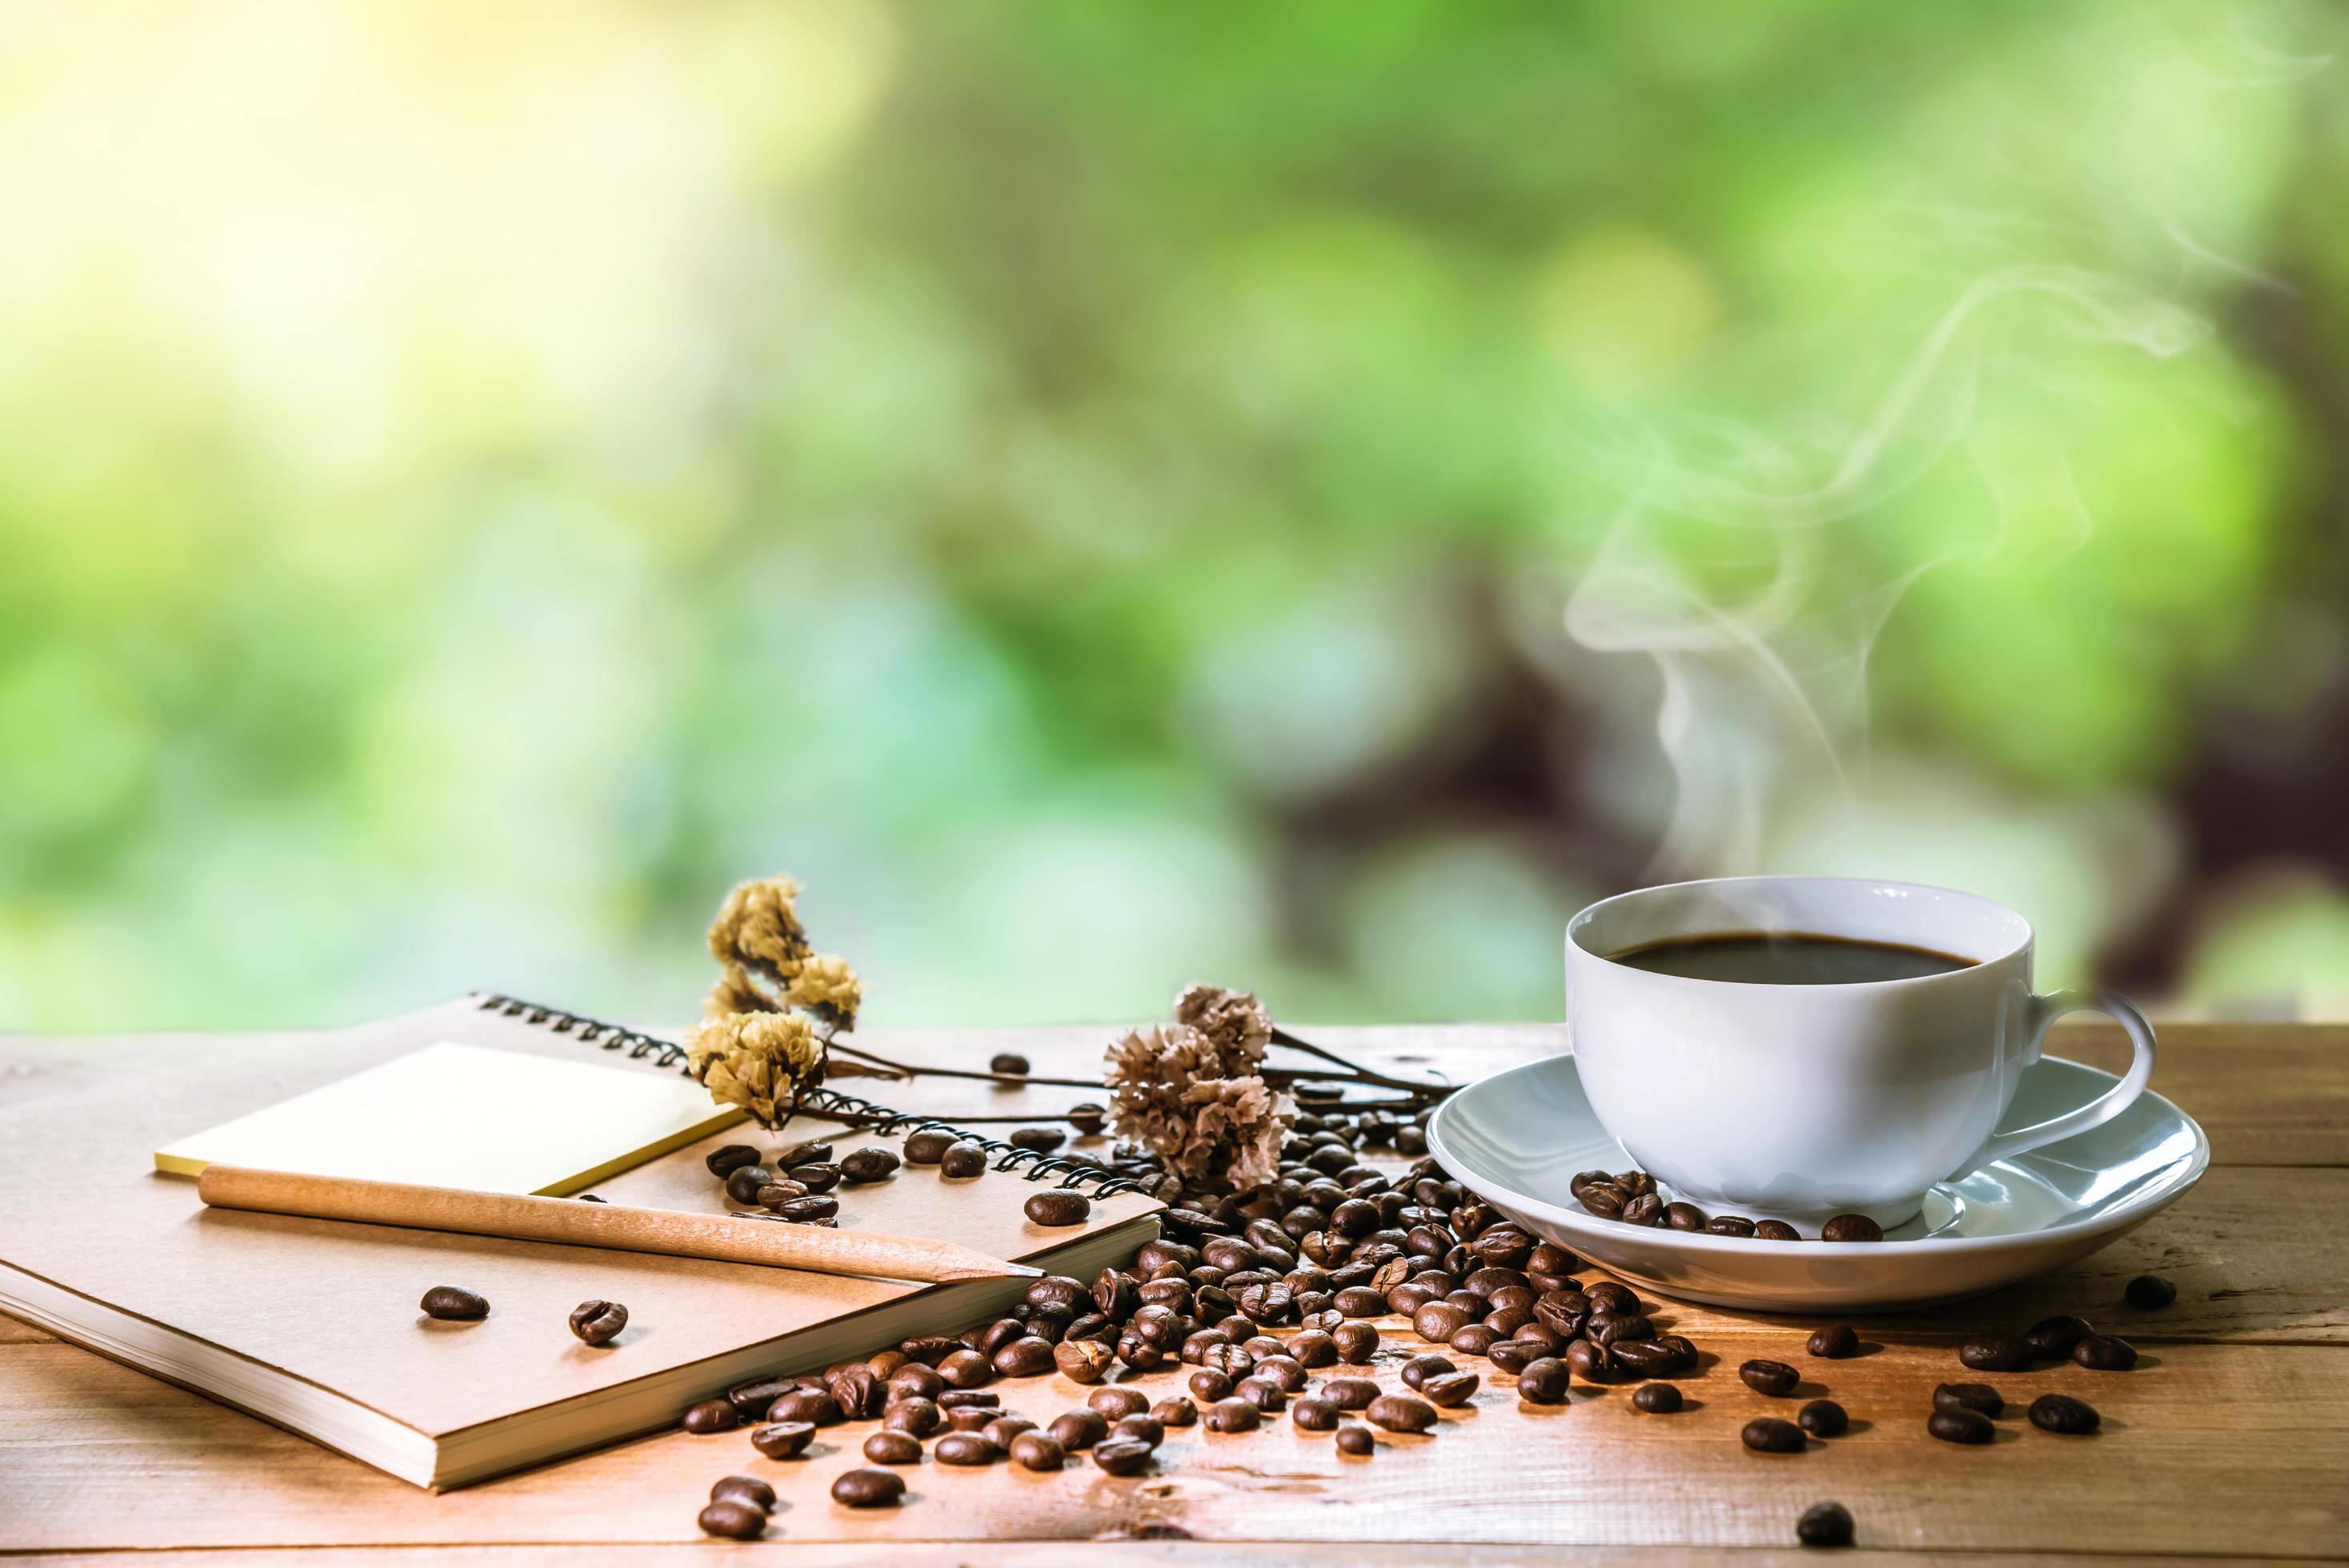 morning-cup-of-coffee-espresso-and-coffee-beans-the-background-nature-blur-free-photo.jpg